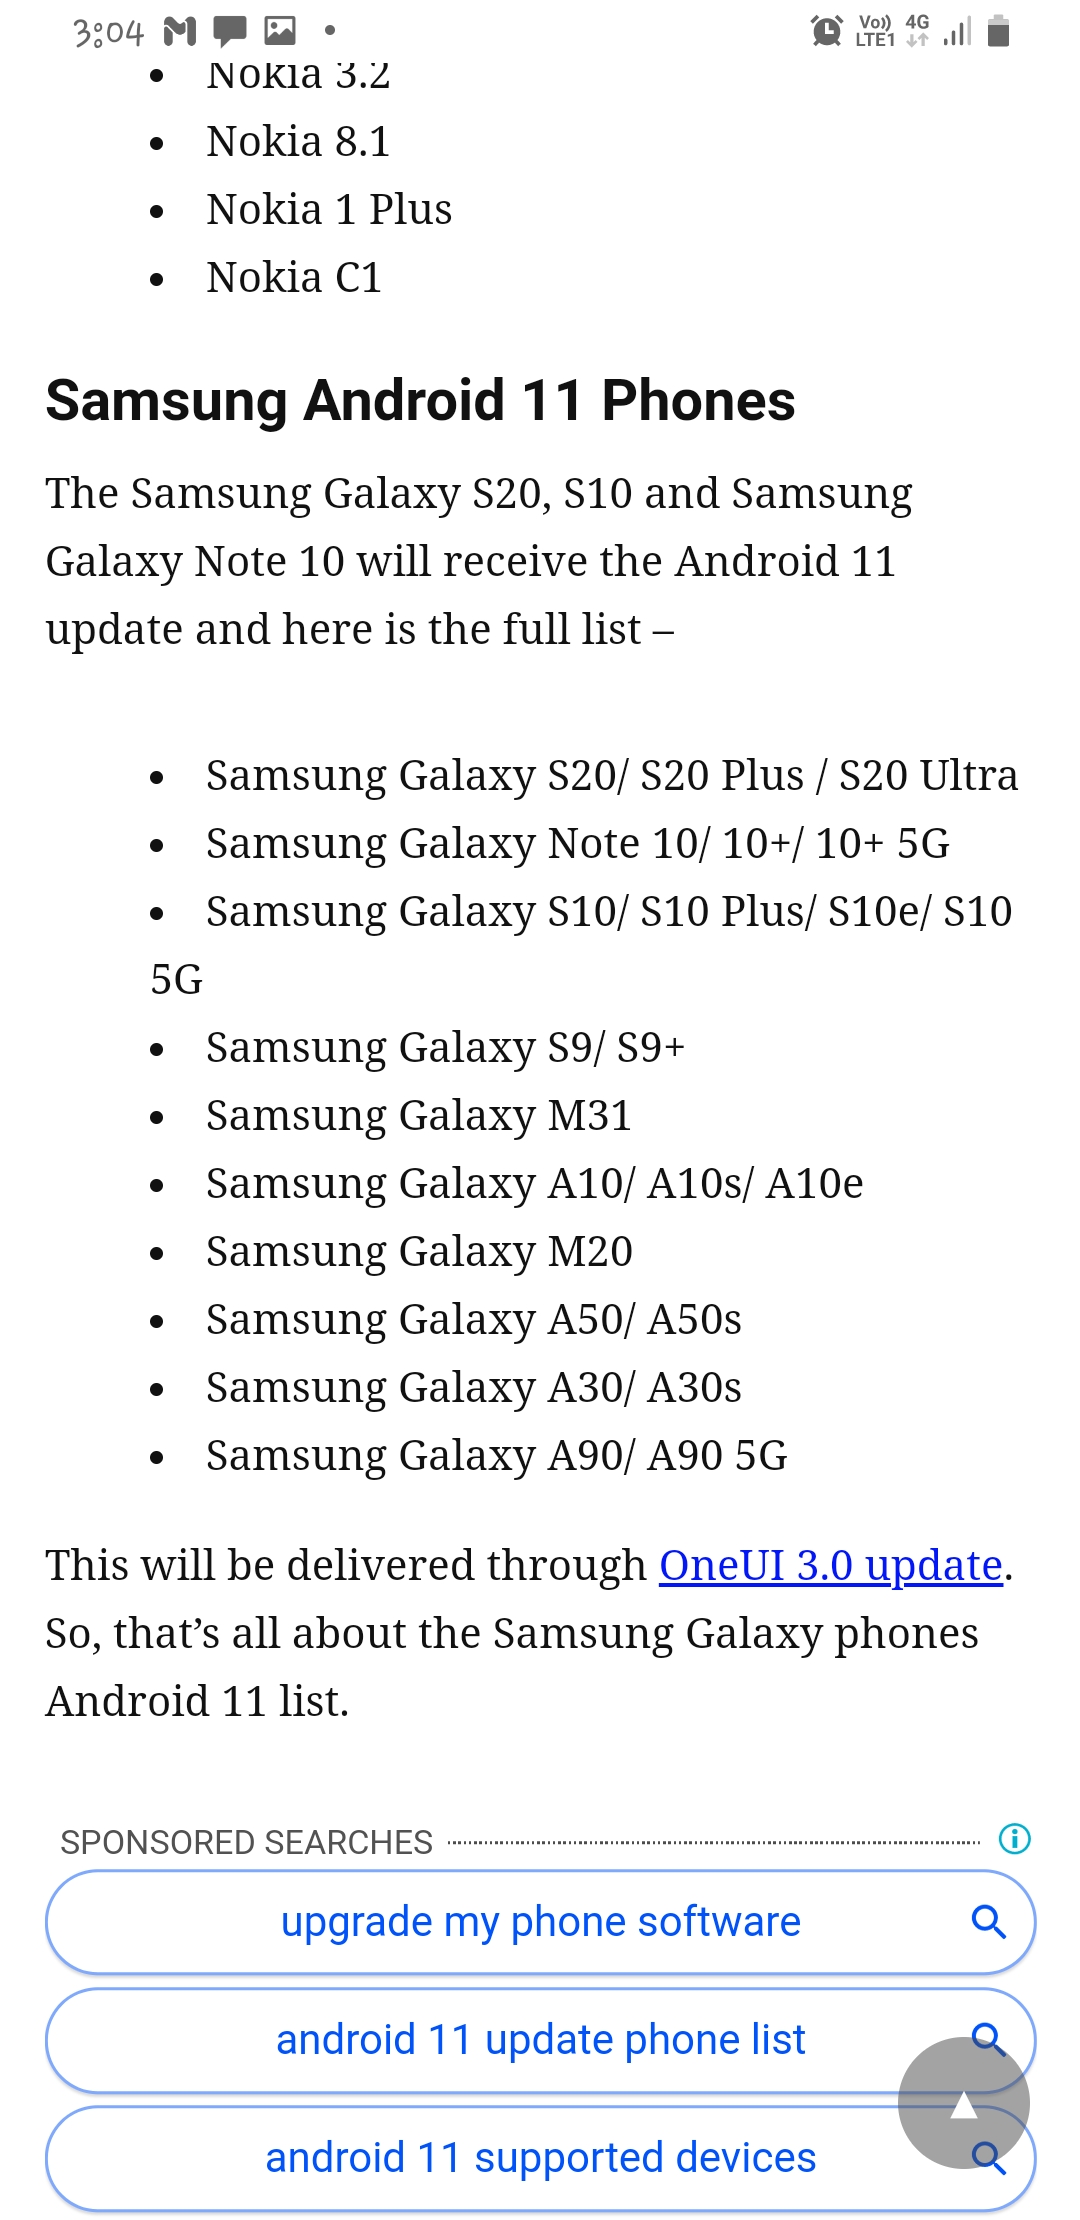 Android 11 included s9 may samsung change there po... - Samsung Members